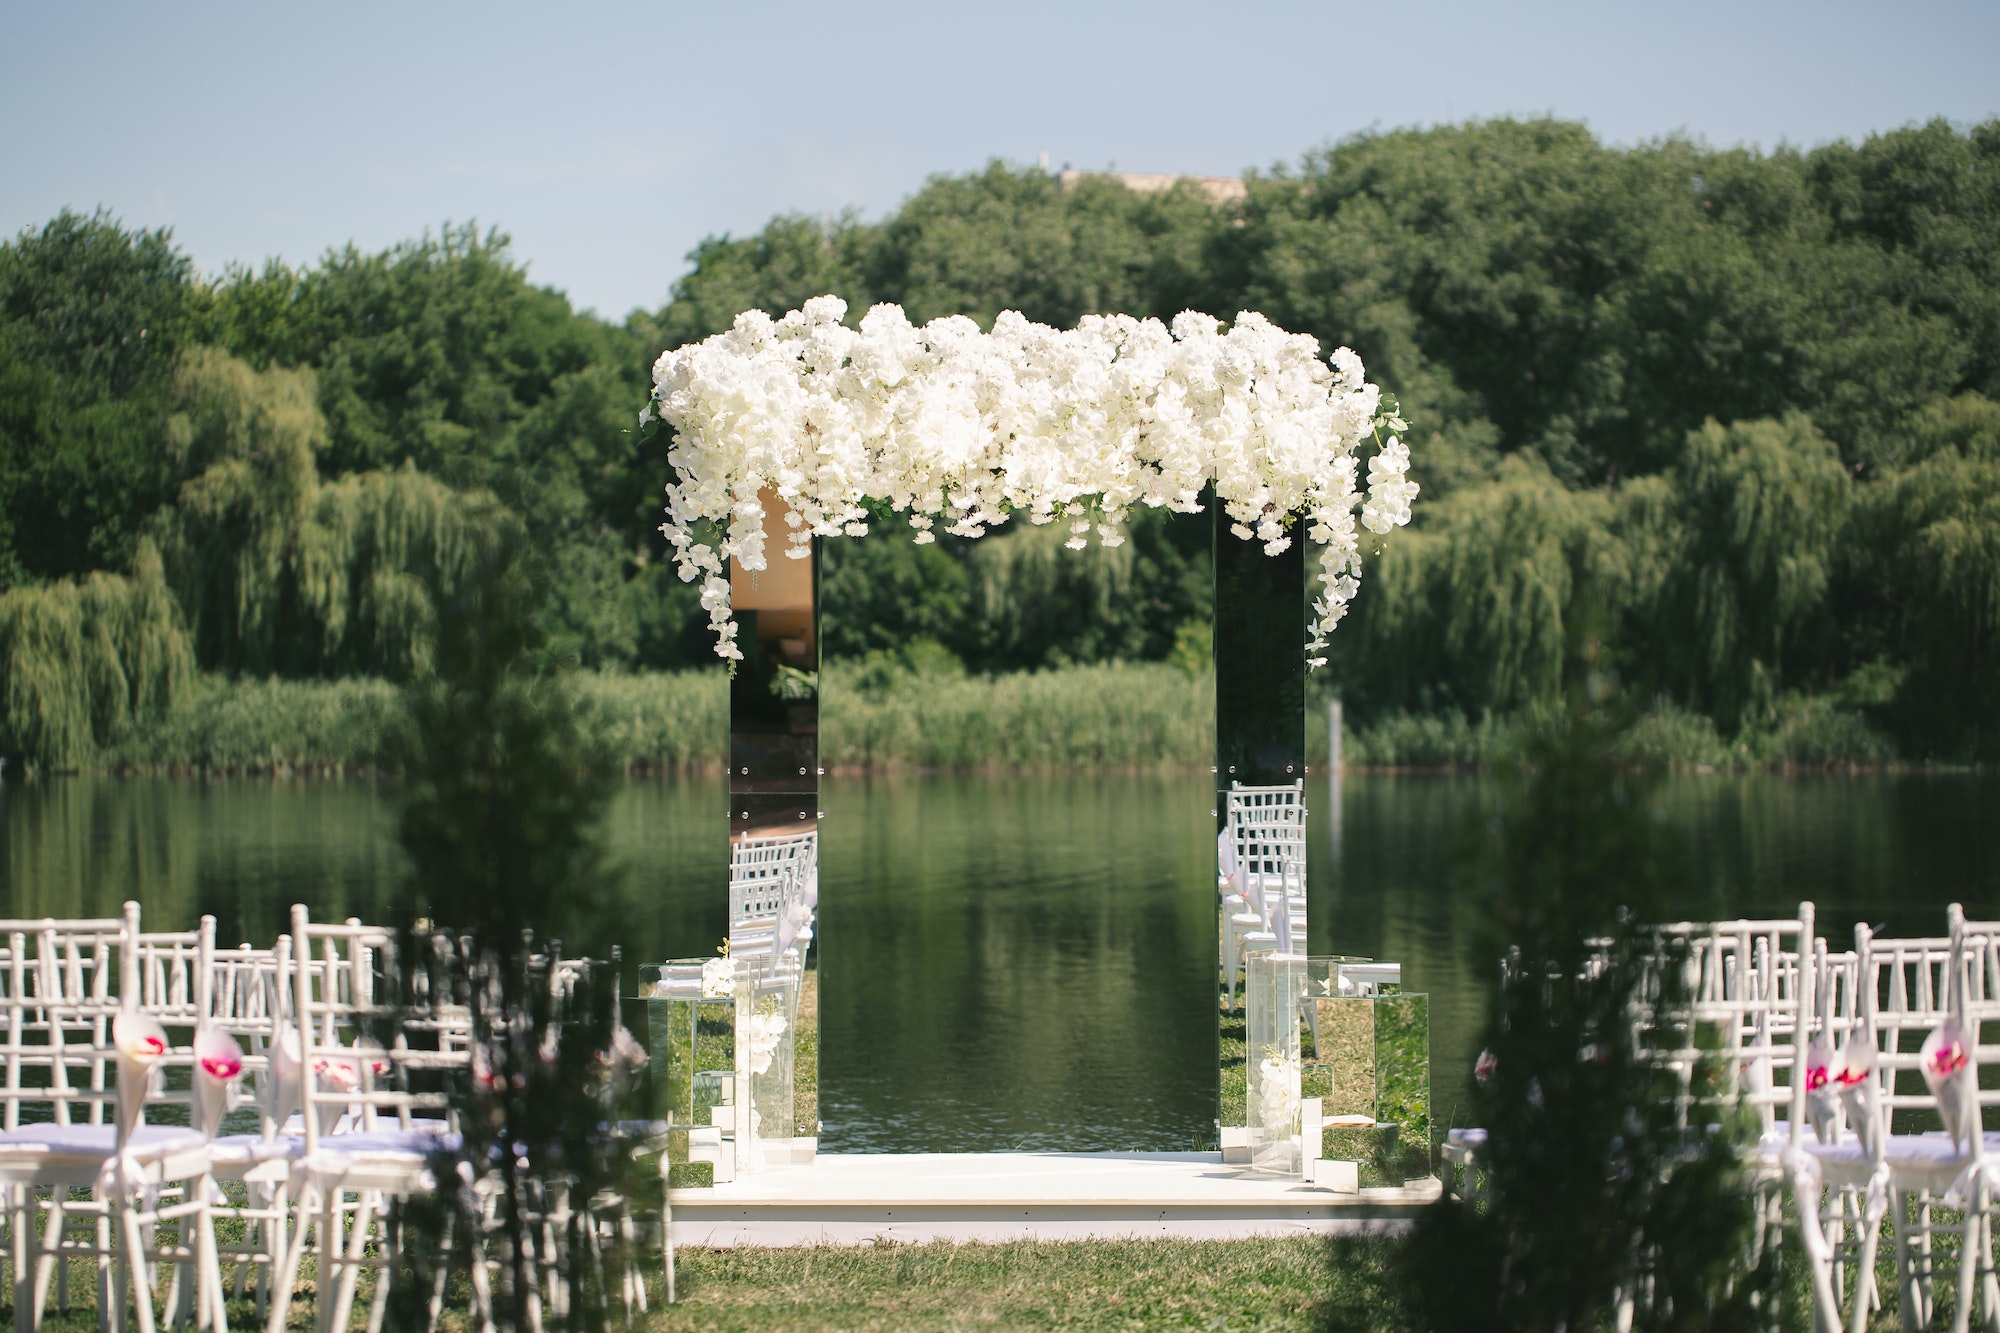 White mirrored wedding arch decorated with white flowers. The concept of an outdoor wedding ceremony